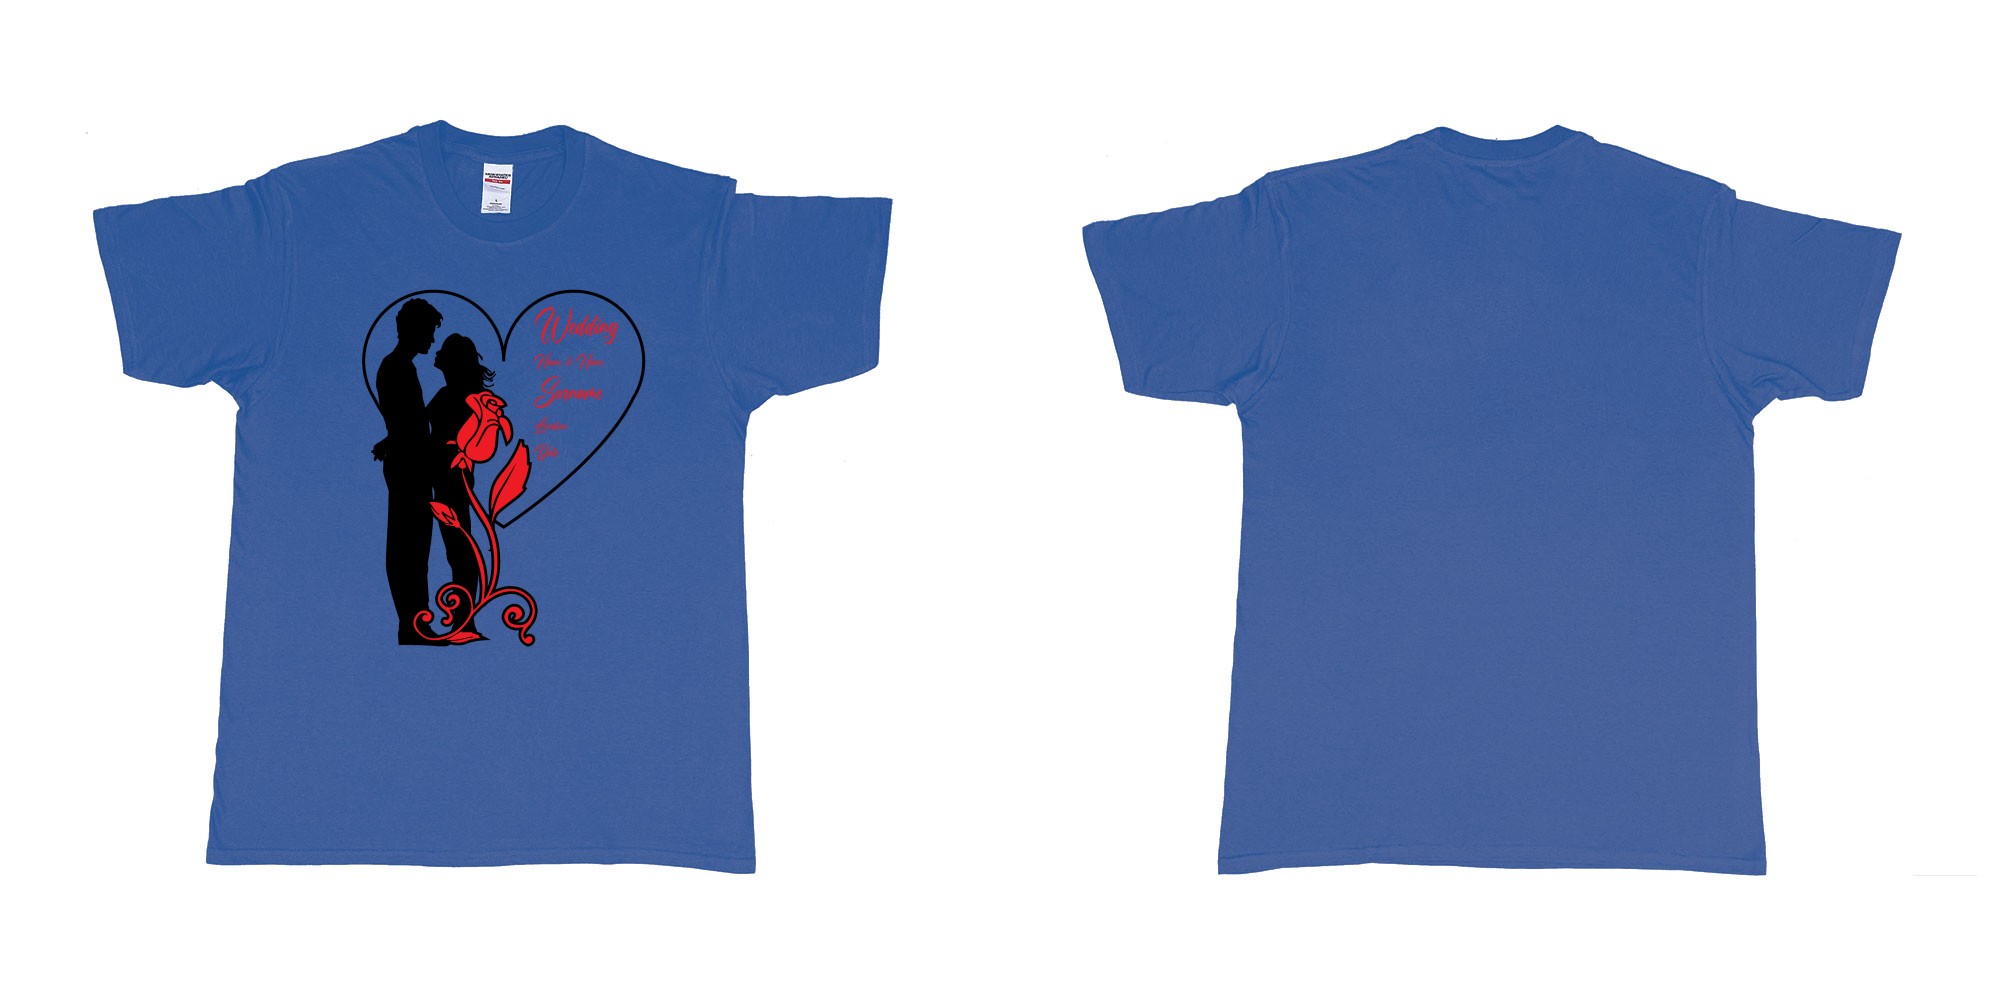 Custom tshirt design wedding couple rose heart in fabric color royal-blue choice your own text made in Bali by The Pirate Way